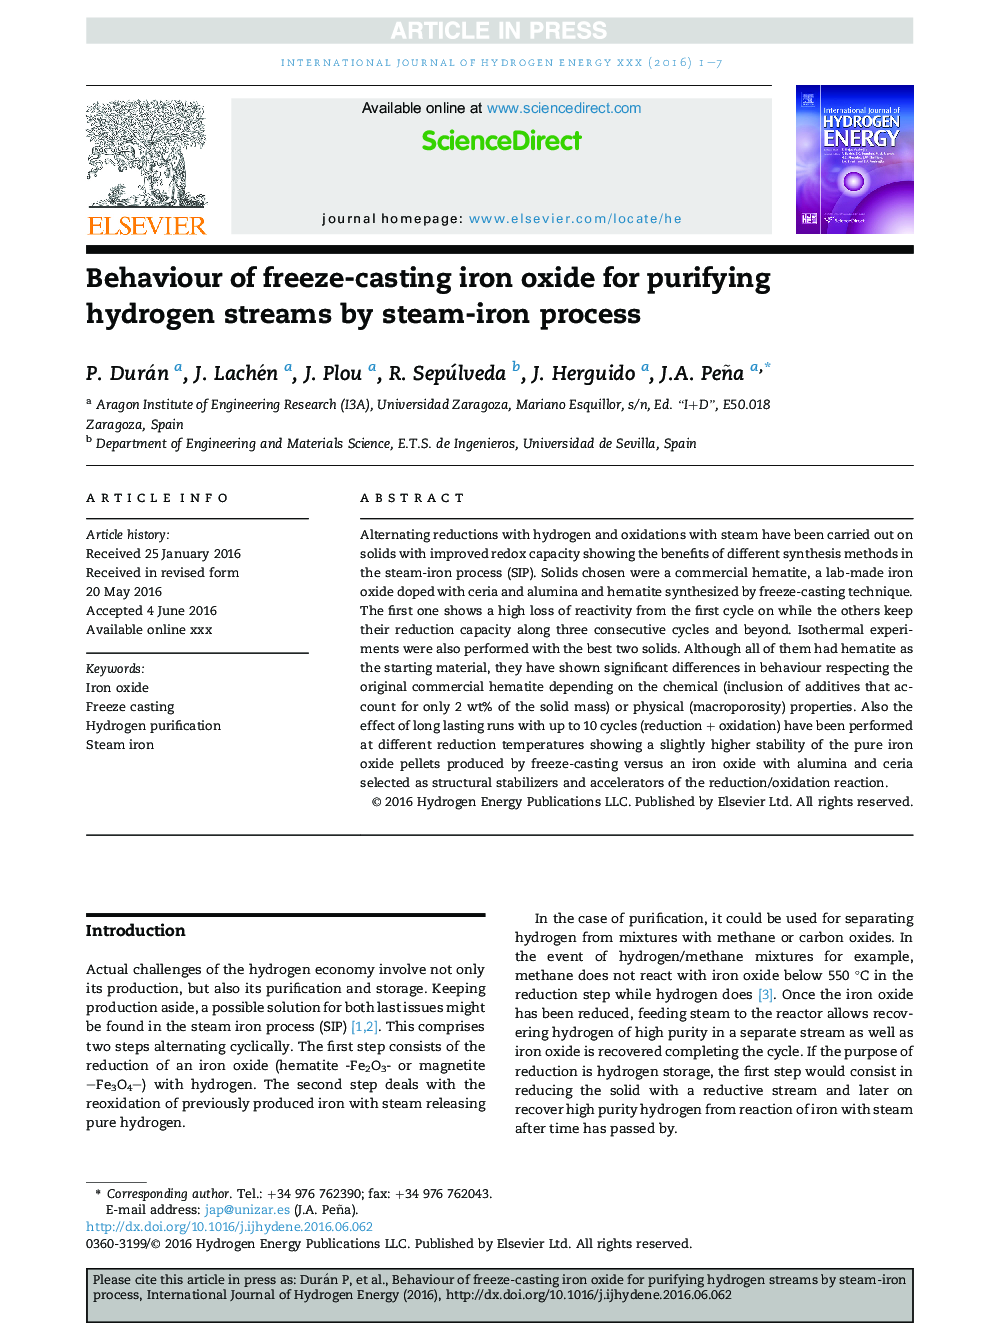 Behaviour of freeze-casting iron oxide for purifying hydrogen streams by steam-iron process